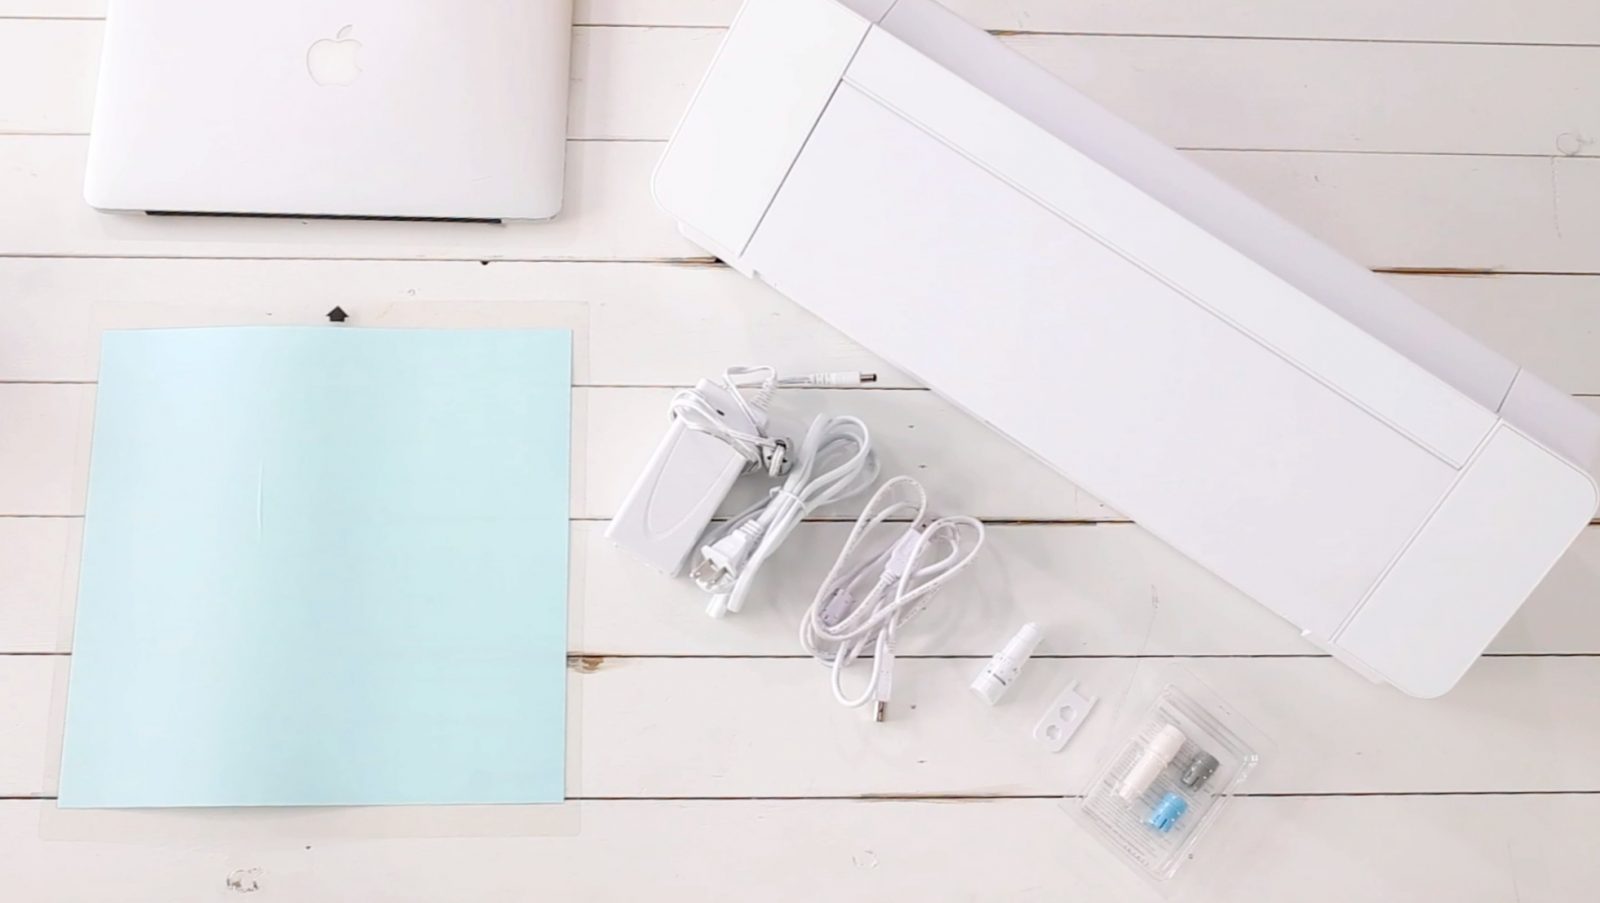 How To Use Silhouette Cameo 3: A Complete Guide for Beginners